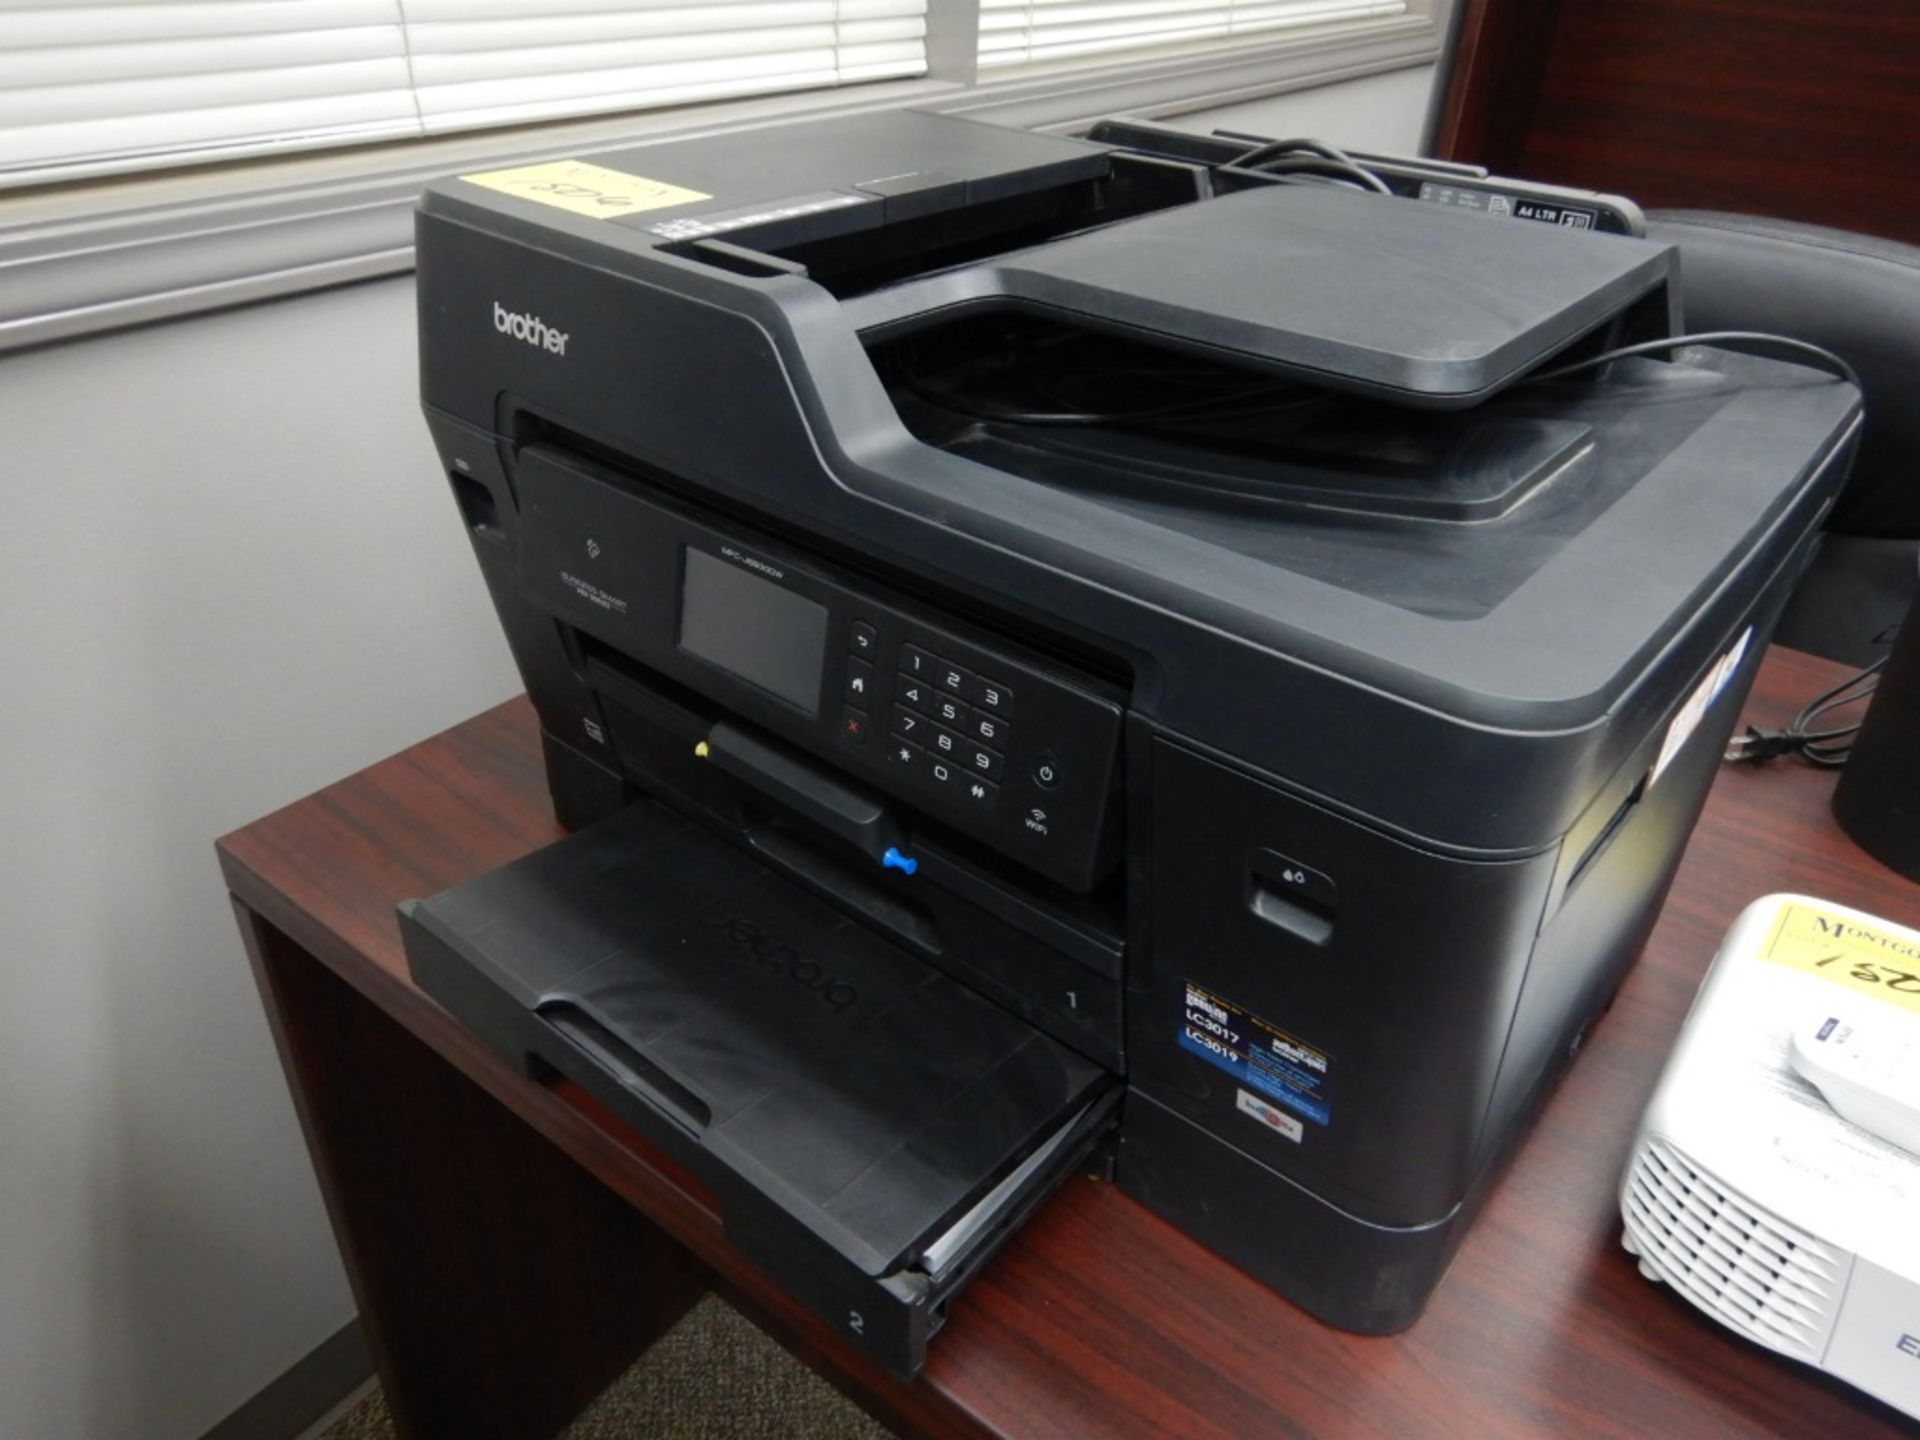 BROTHER MFC-J6930DW ALL-IN-ONE PRINTER